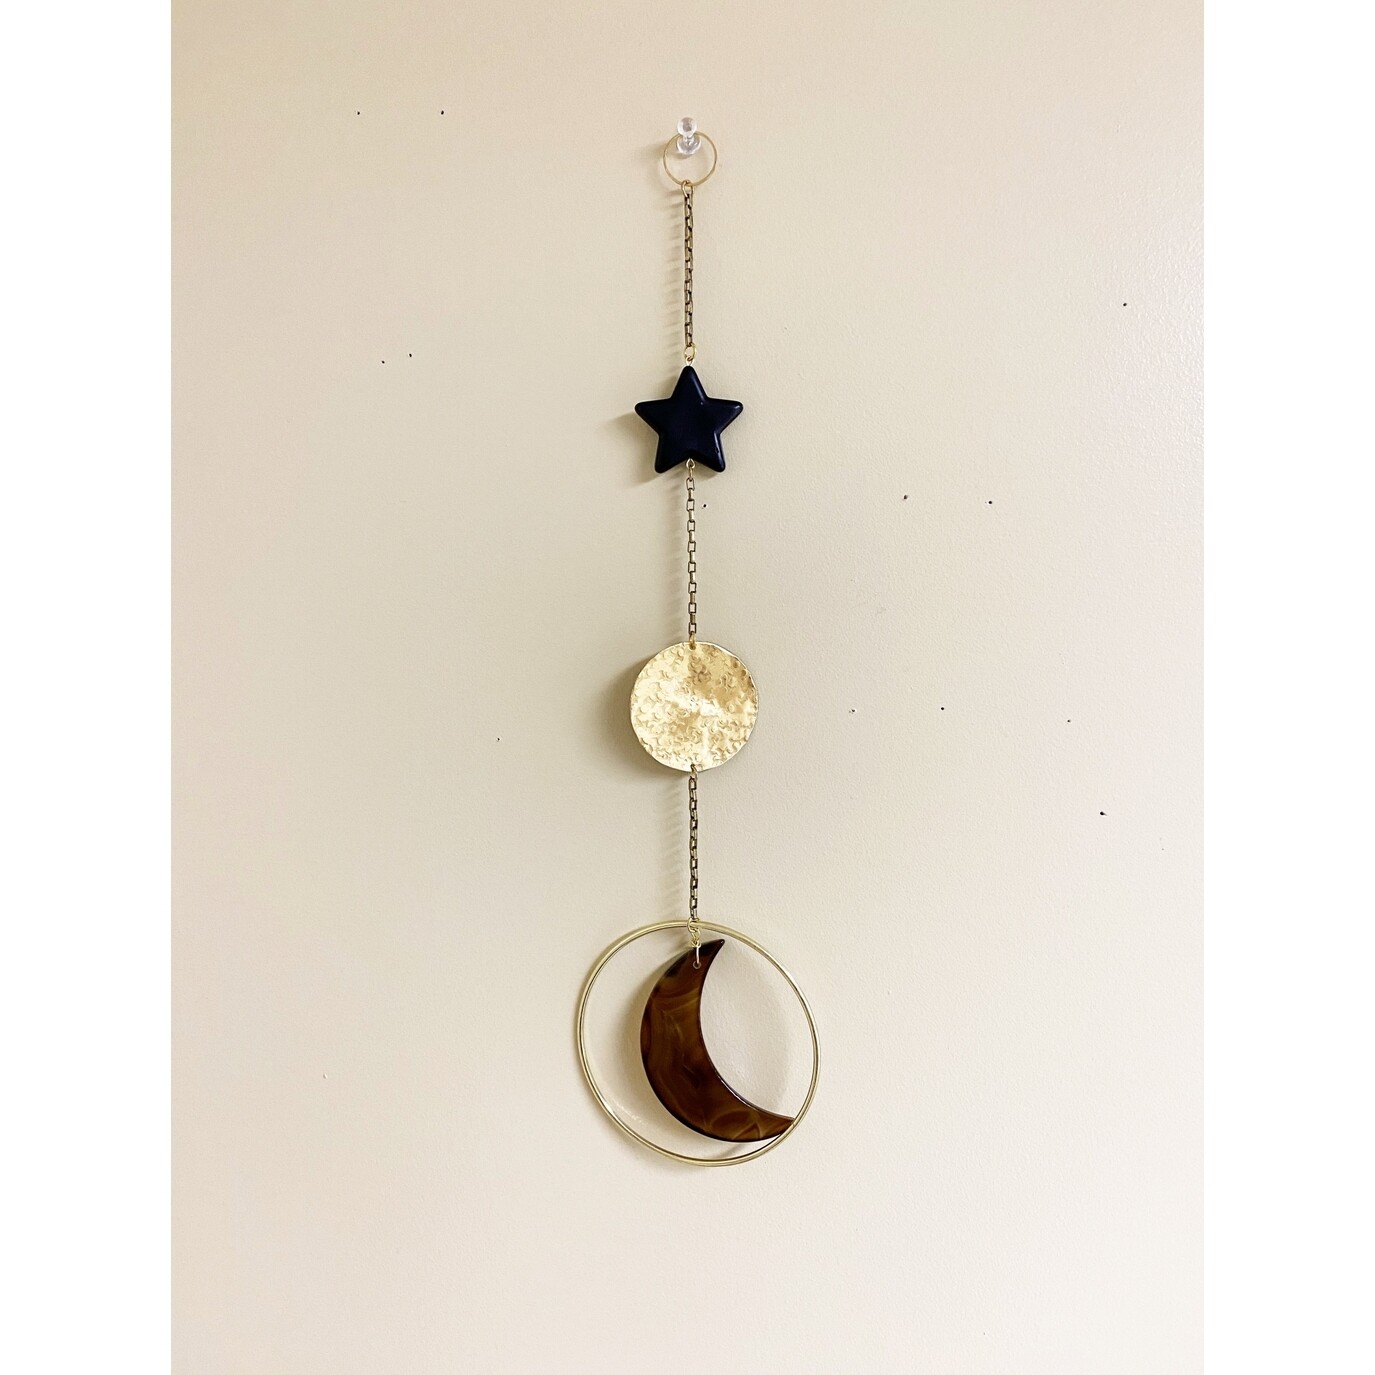 Star and Moon Celestial Gemstone and Brass Wall Hanging